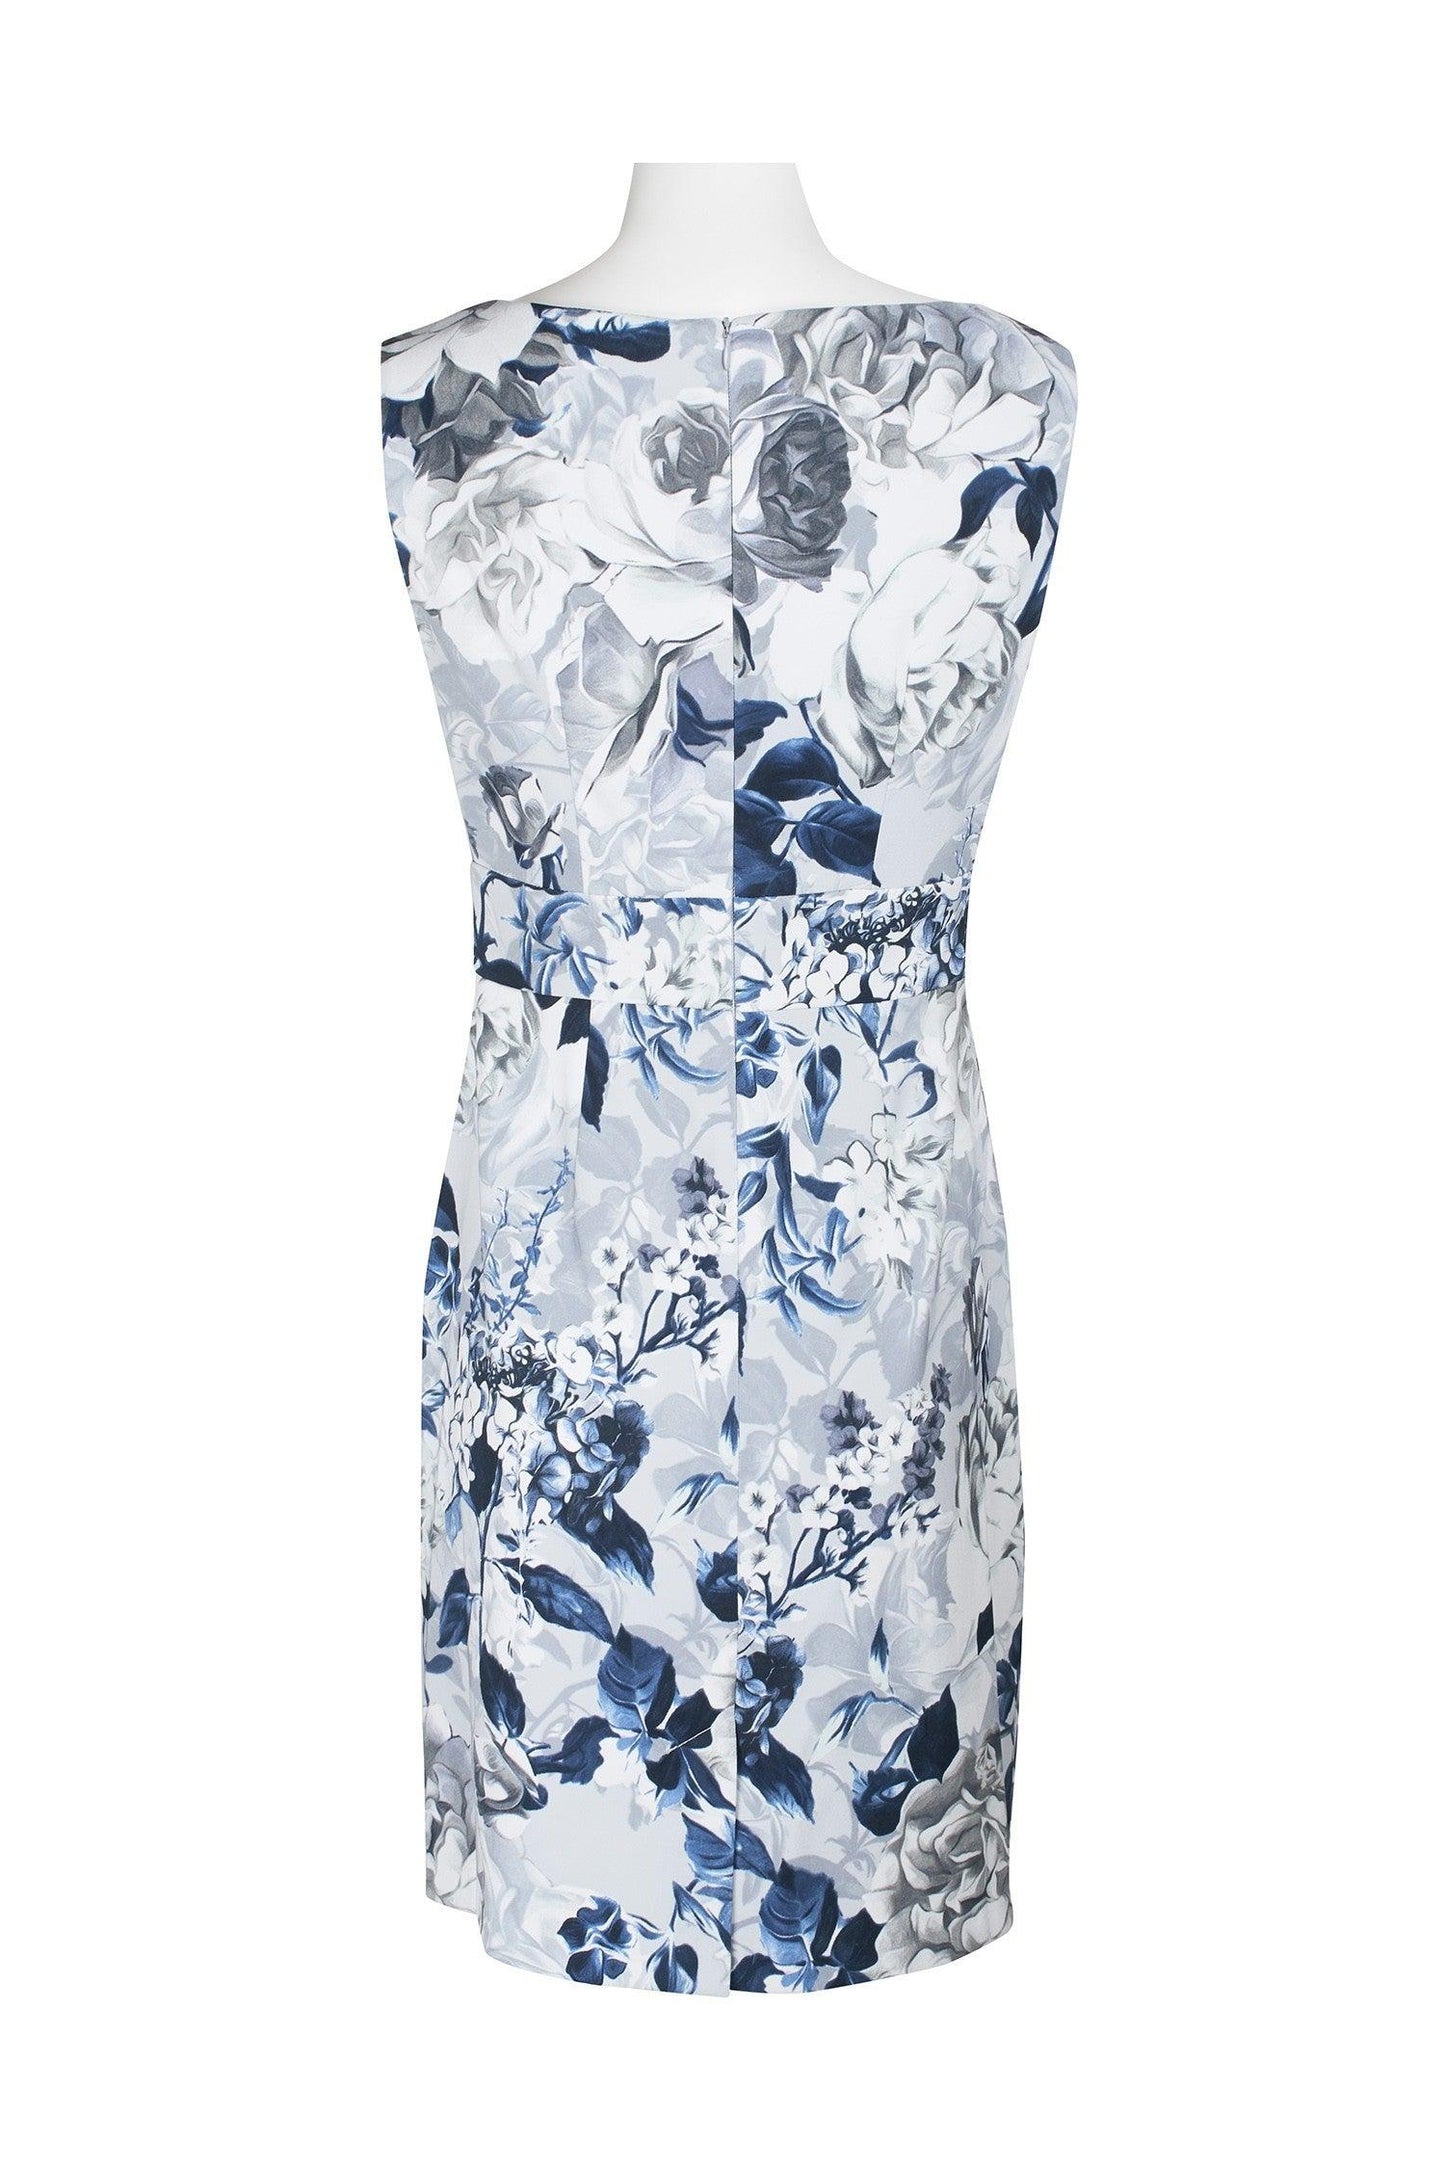 Connected Apparel Short Sleeveless Floral Dress Sale - The Dress Outlet